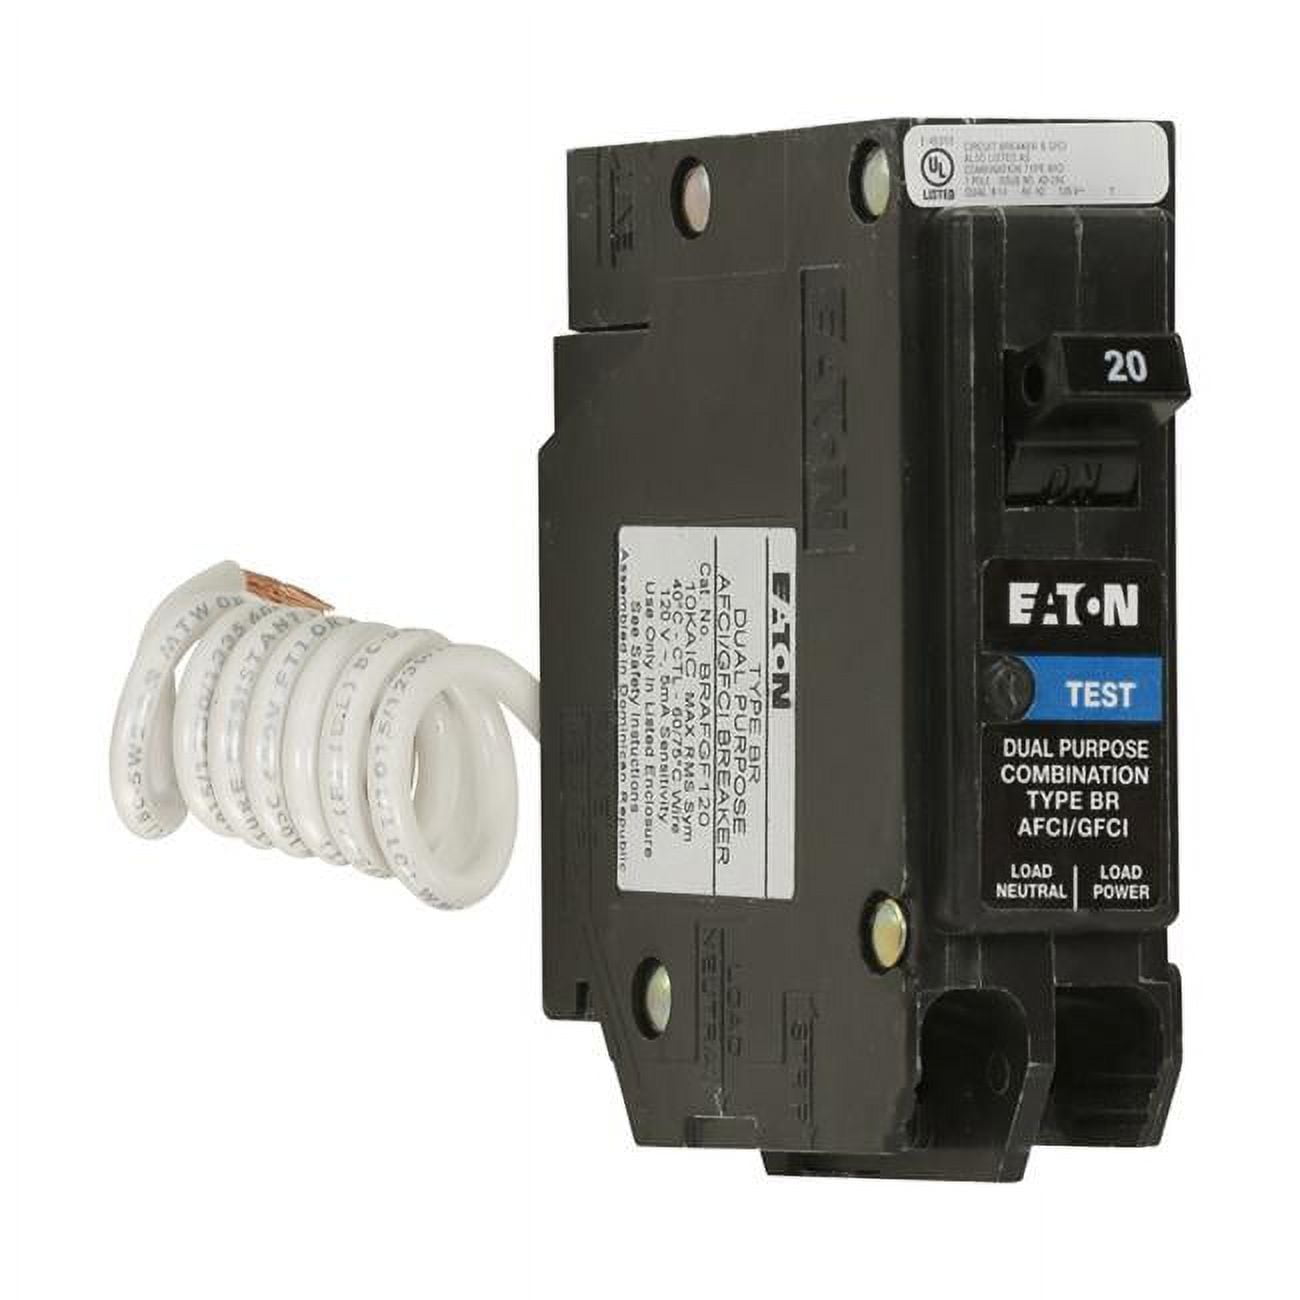 Picture of Eaton 3001272 20 amp Arc Fault & Ground Fault Single Pole Circuit Breaker with Self Test